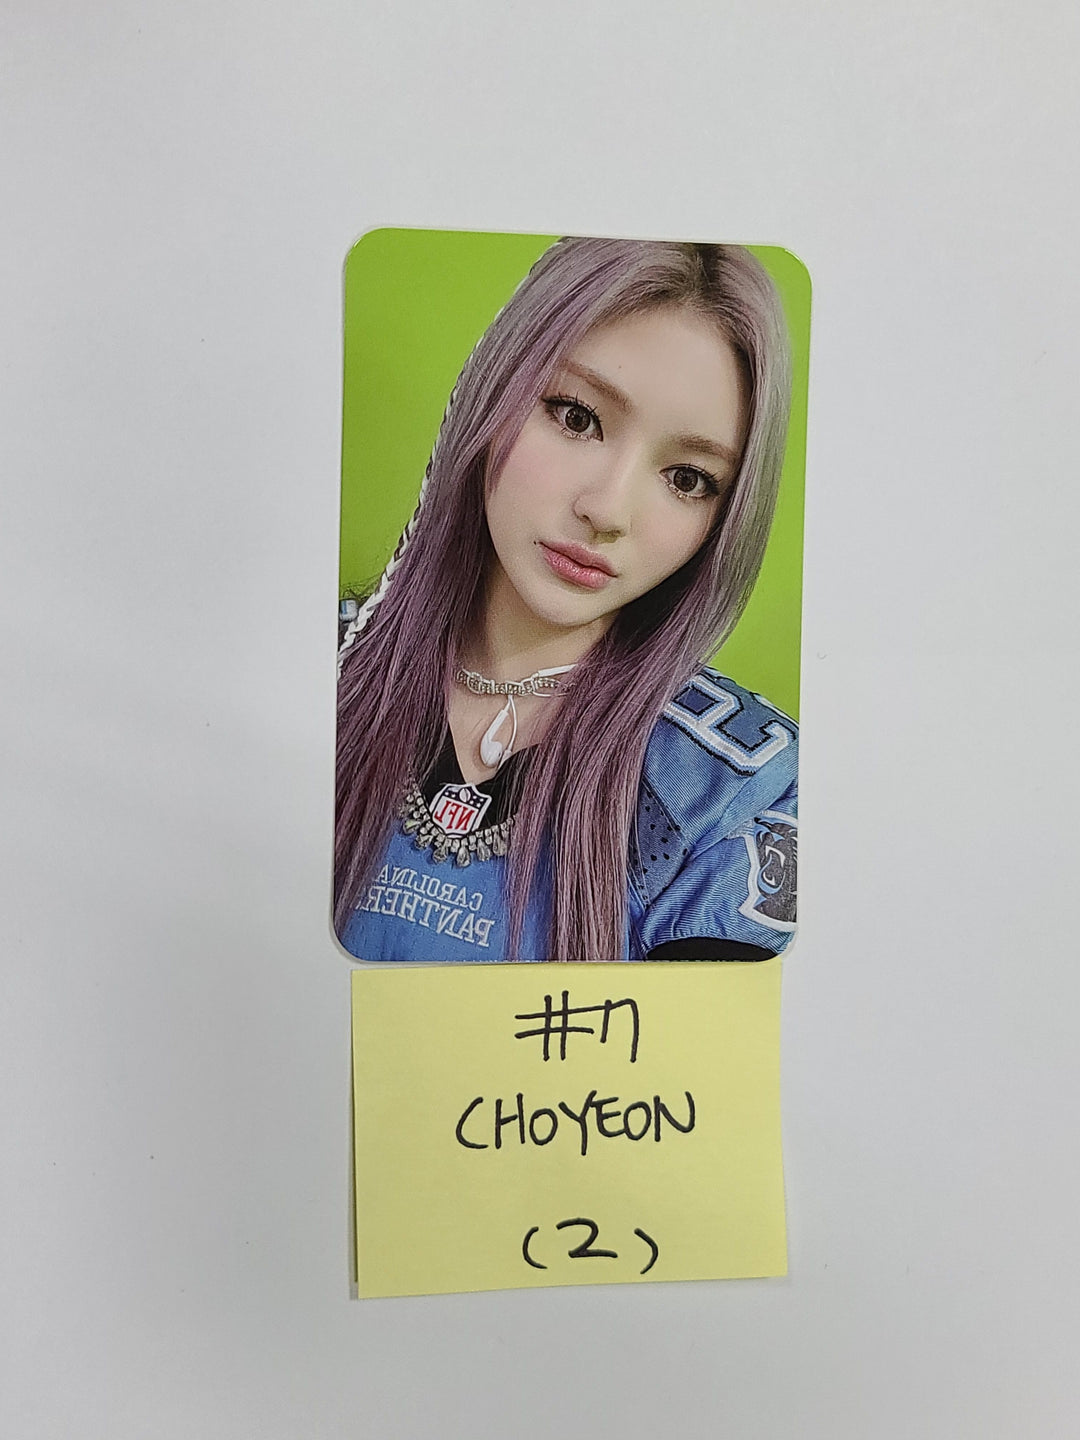 Bugaboo "POP" - Official Photocard, Photo Ticket, ID Photo